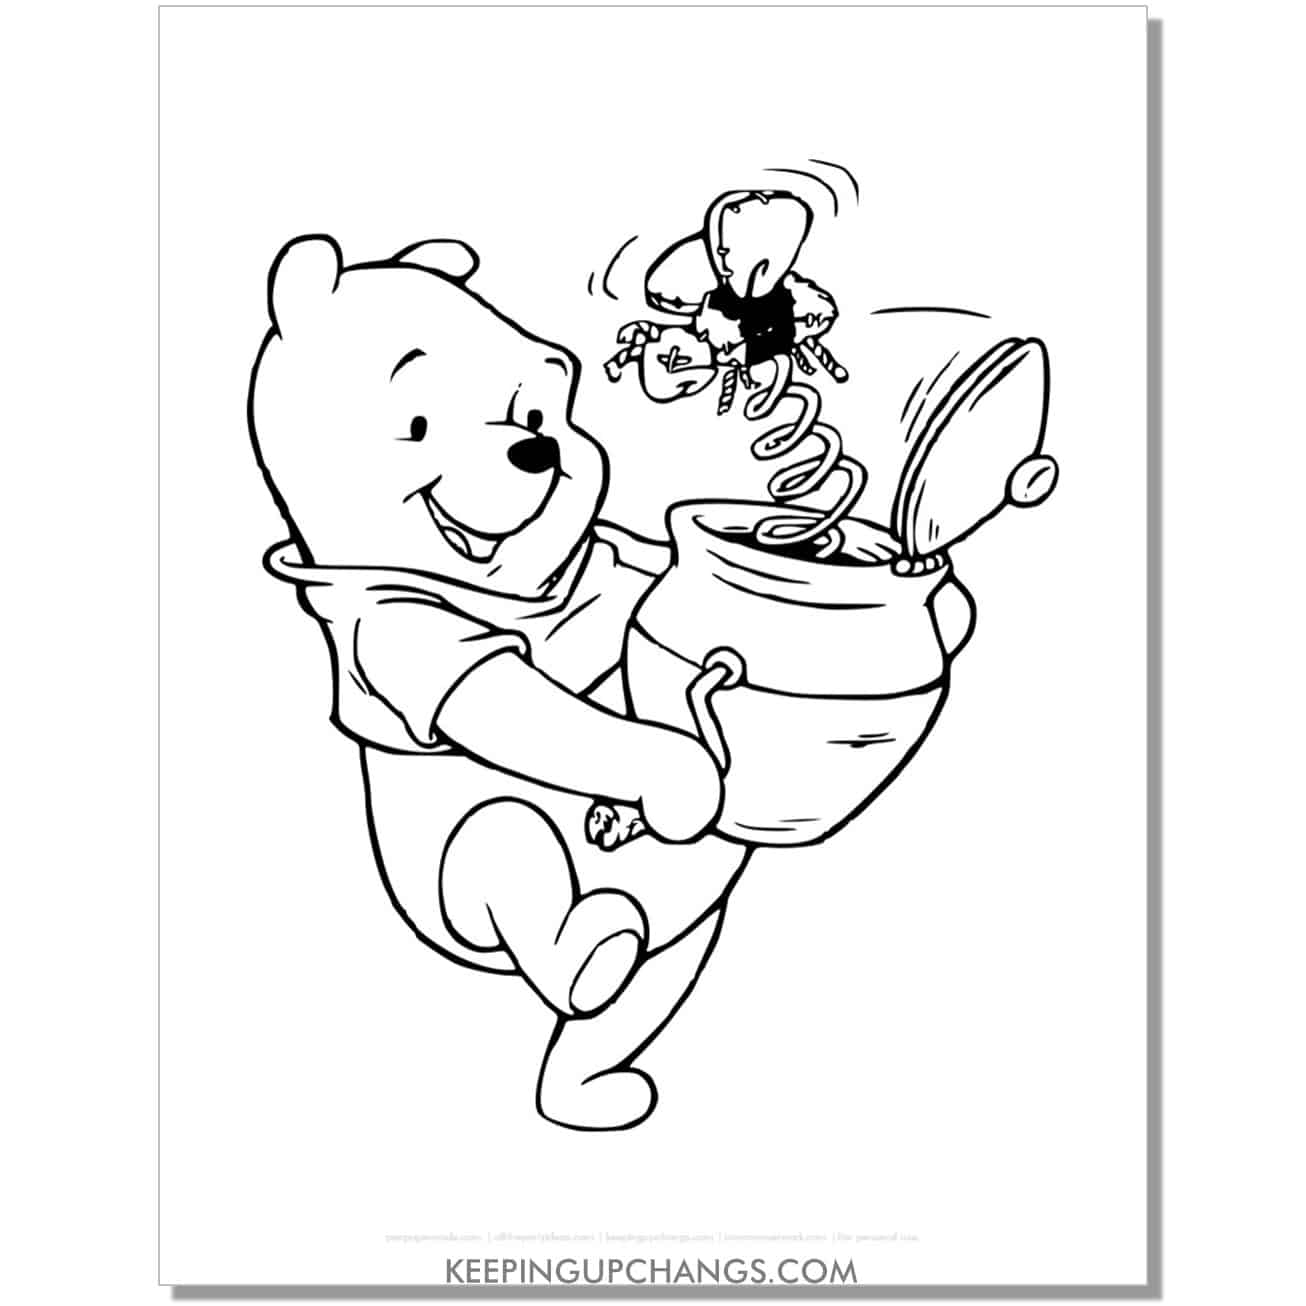 winnie the pooh with jack in the box bee coloring page, sheet.